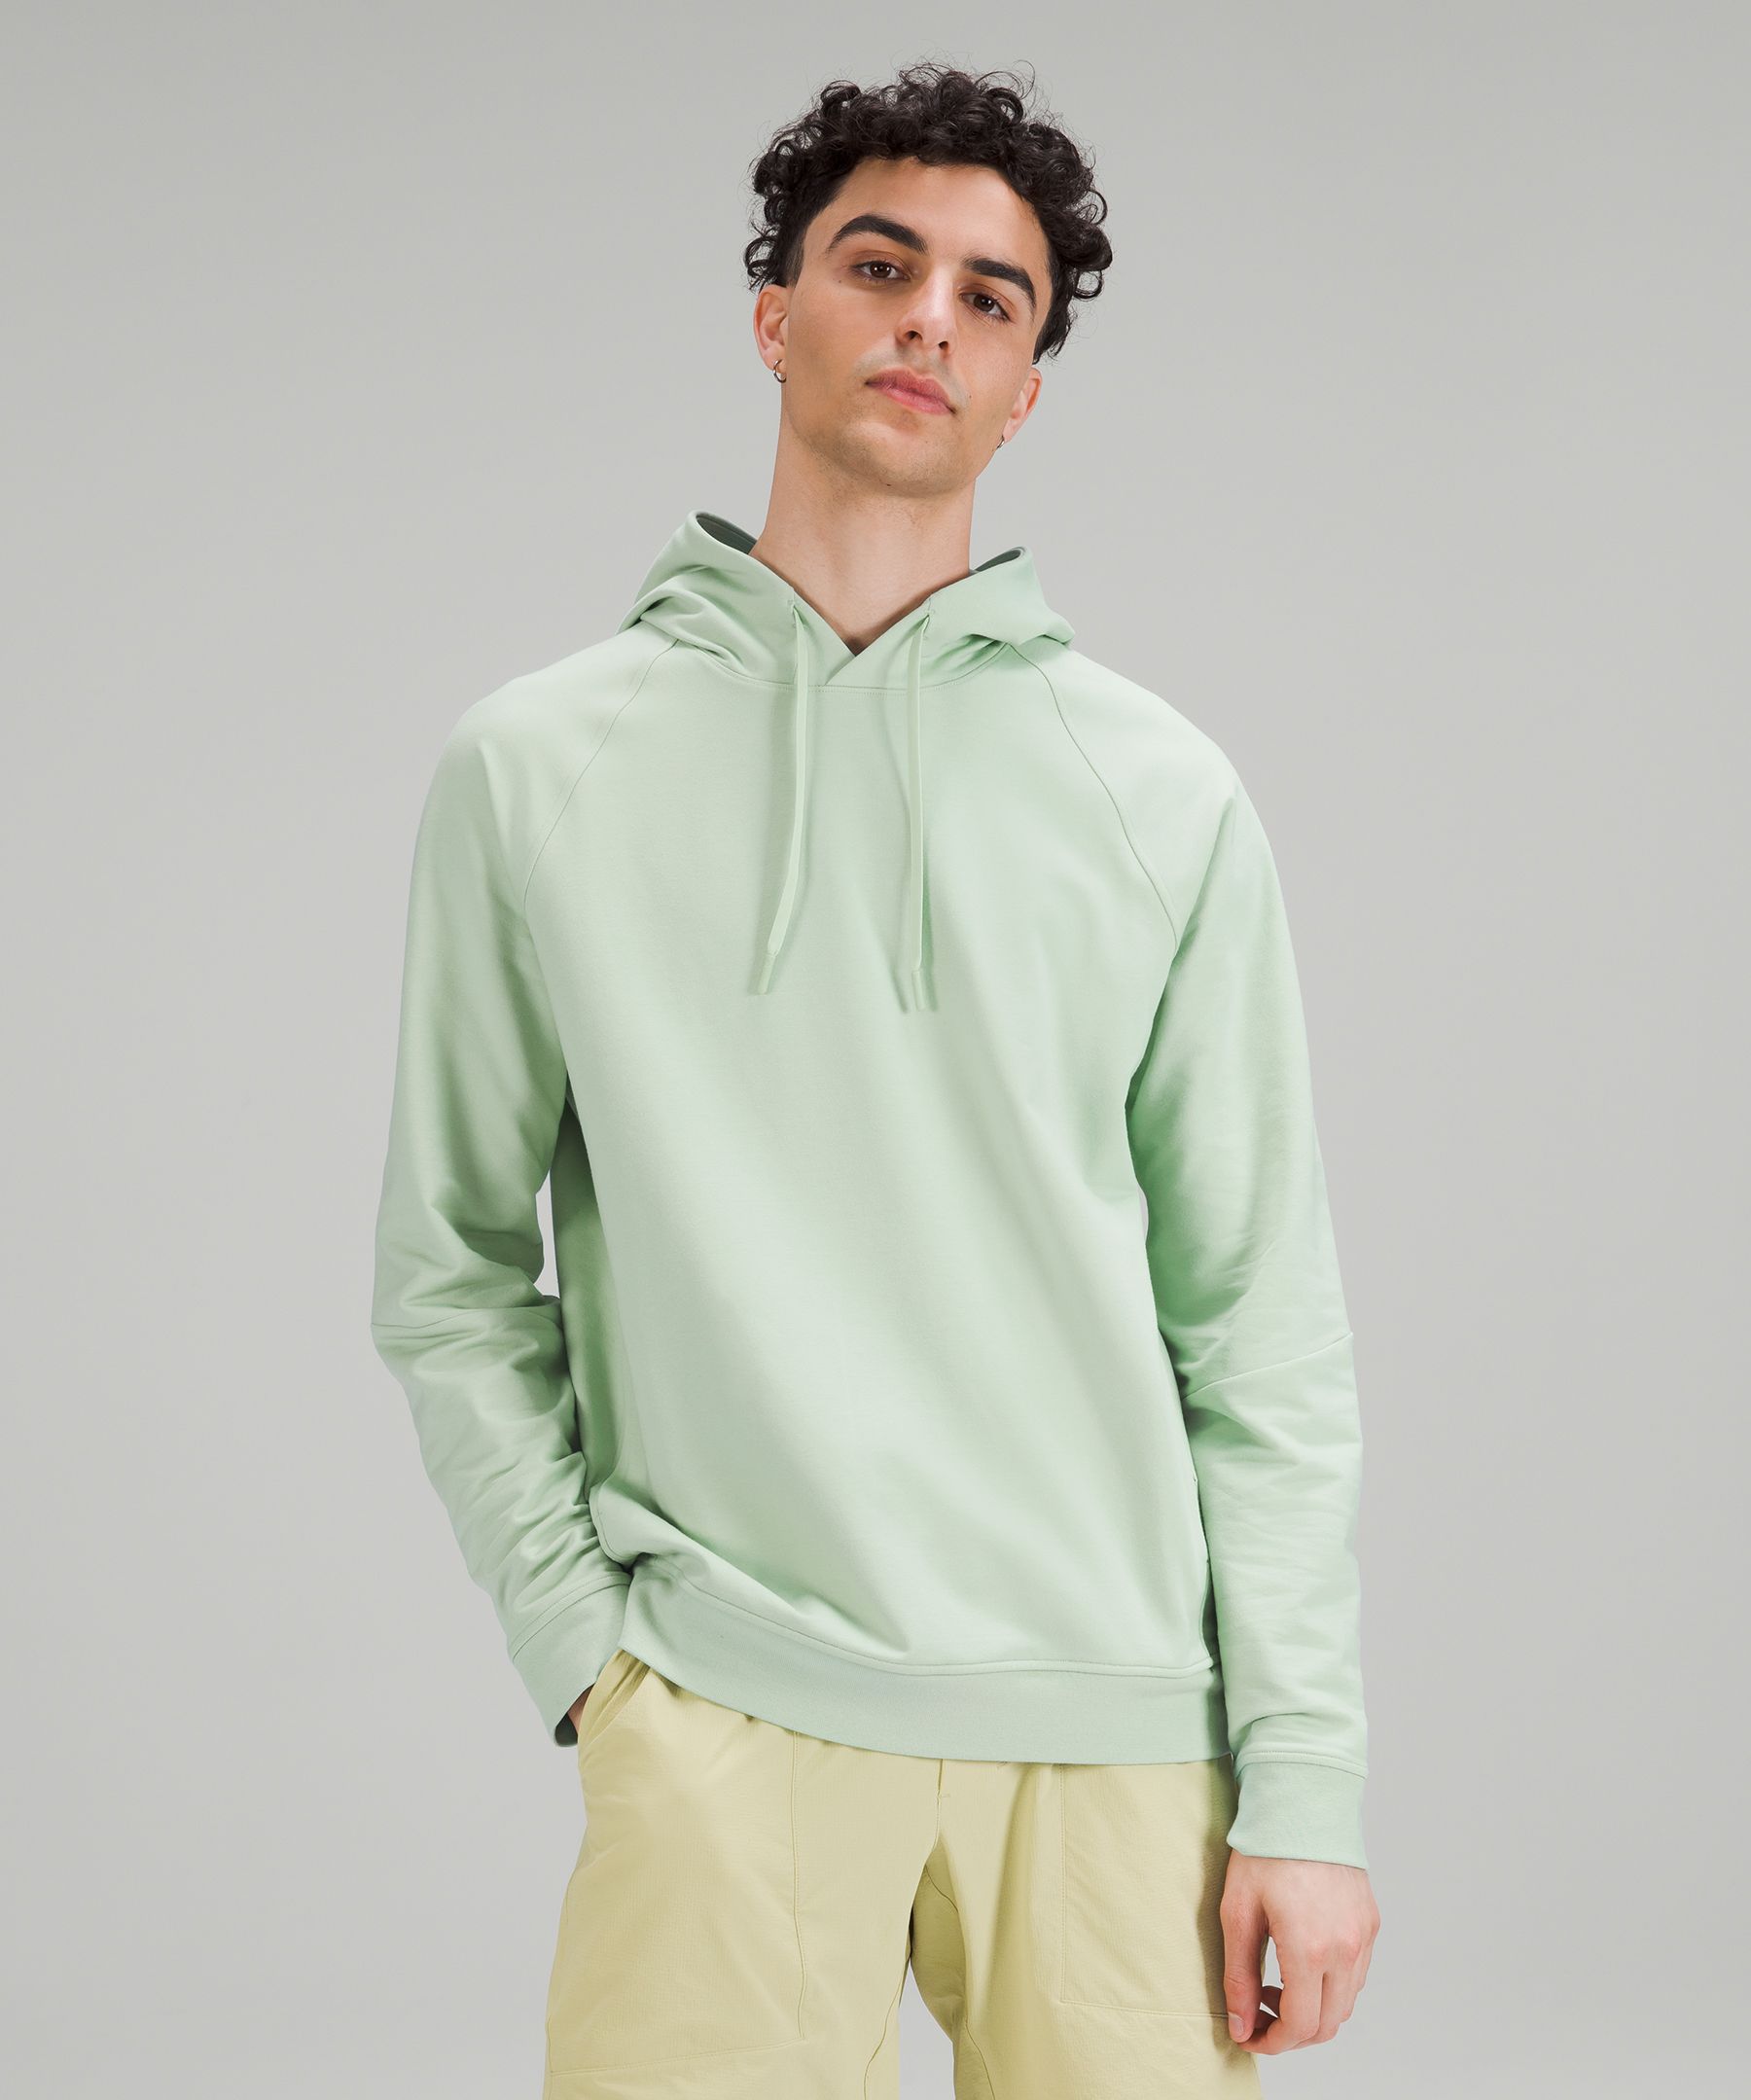 Lululemon City Sweat Pullover Hoodie French Terry